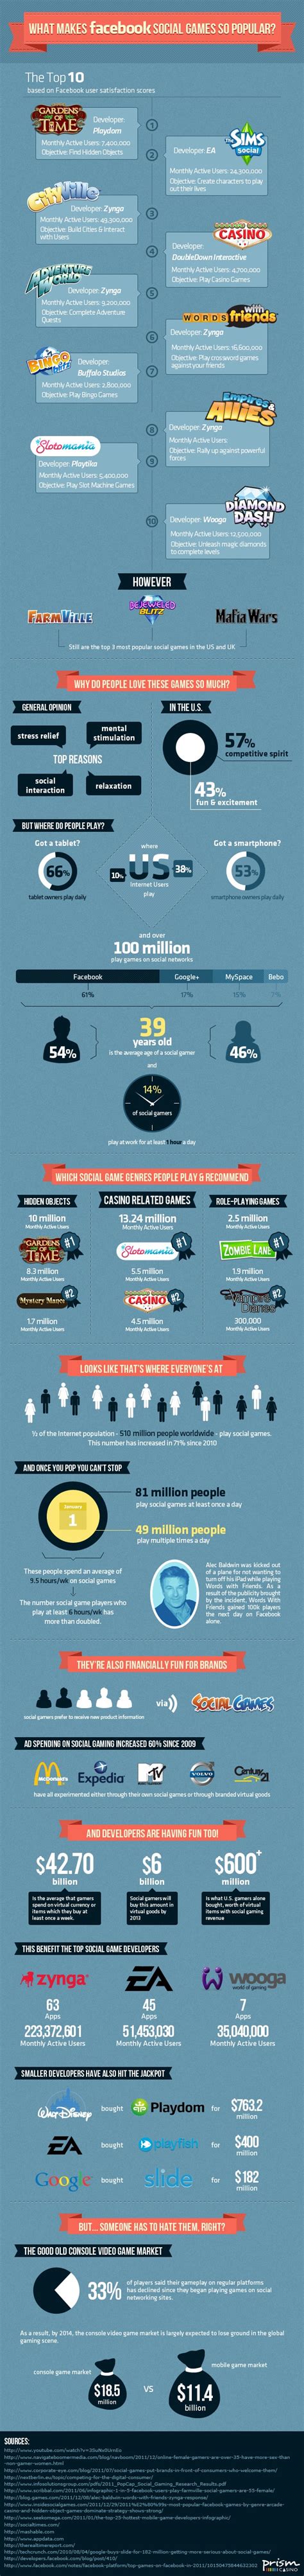 Top Social Games And Why They Are So Popular Infographic Bit Rebels